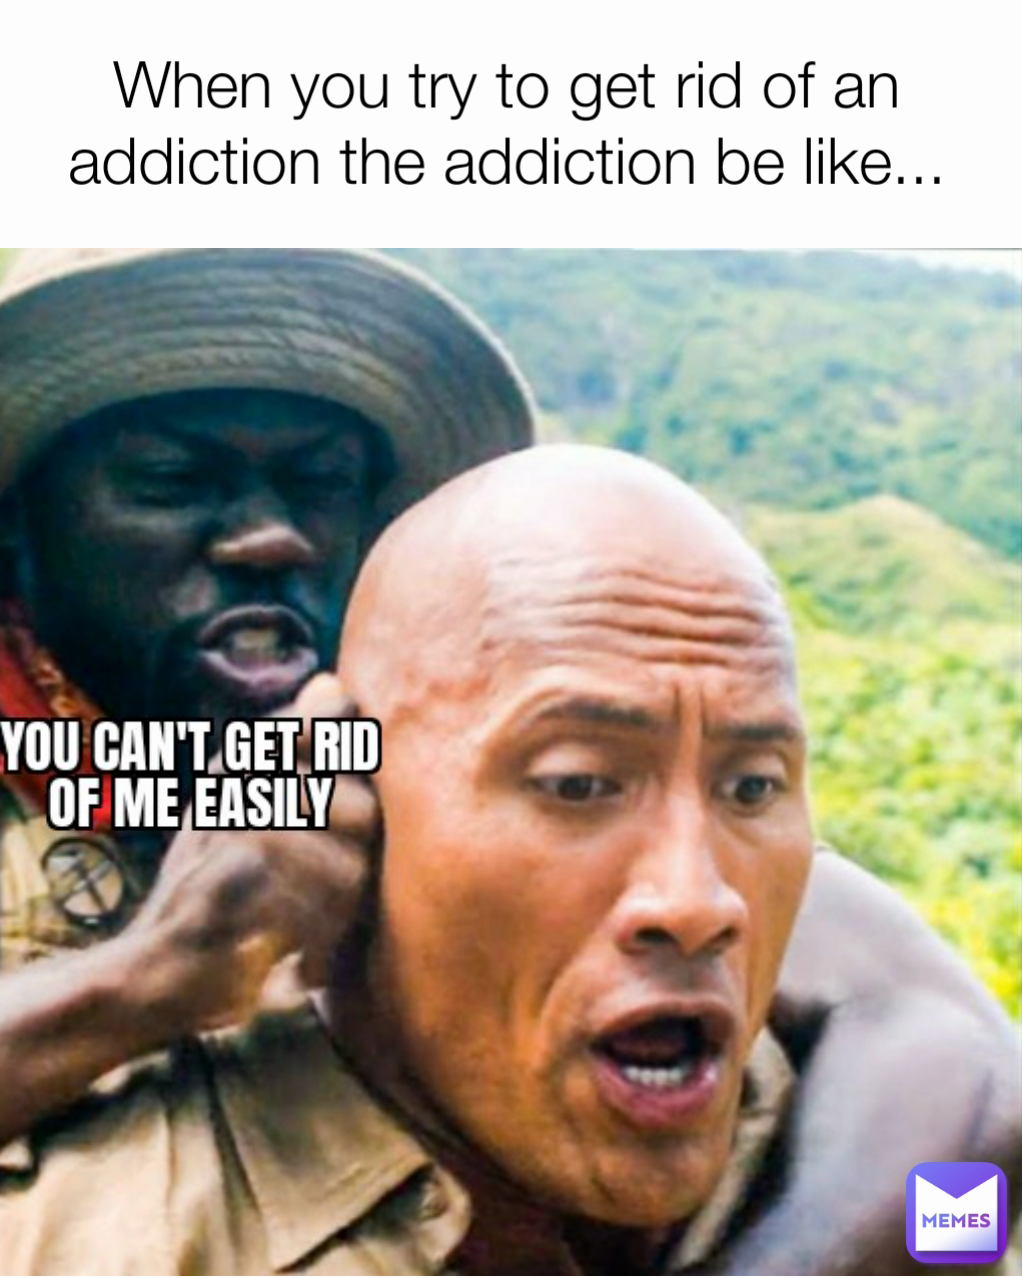 When you try to get rid of an addiction the addiction be like...